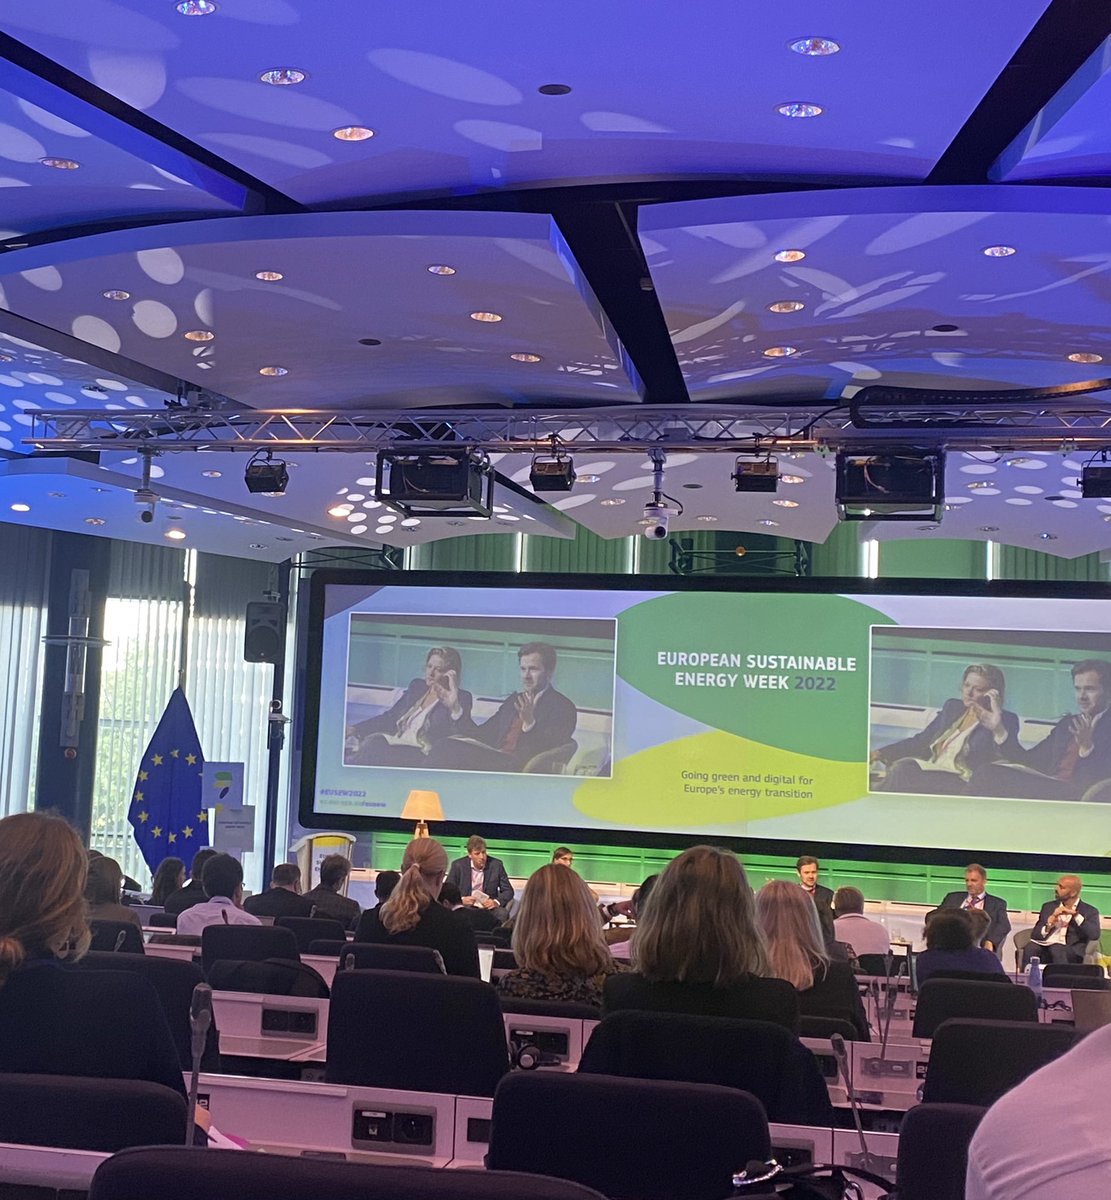 Revised #EnergyEfficiency targets are a necessity - particularly in times of crisis we are in. It will cost money but we will save money in the long-run, says @NielsFuglsang at #EUSEW2022 #EED #EPBD #EnergyEfficiencyFirst